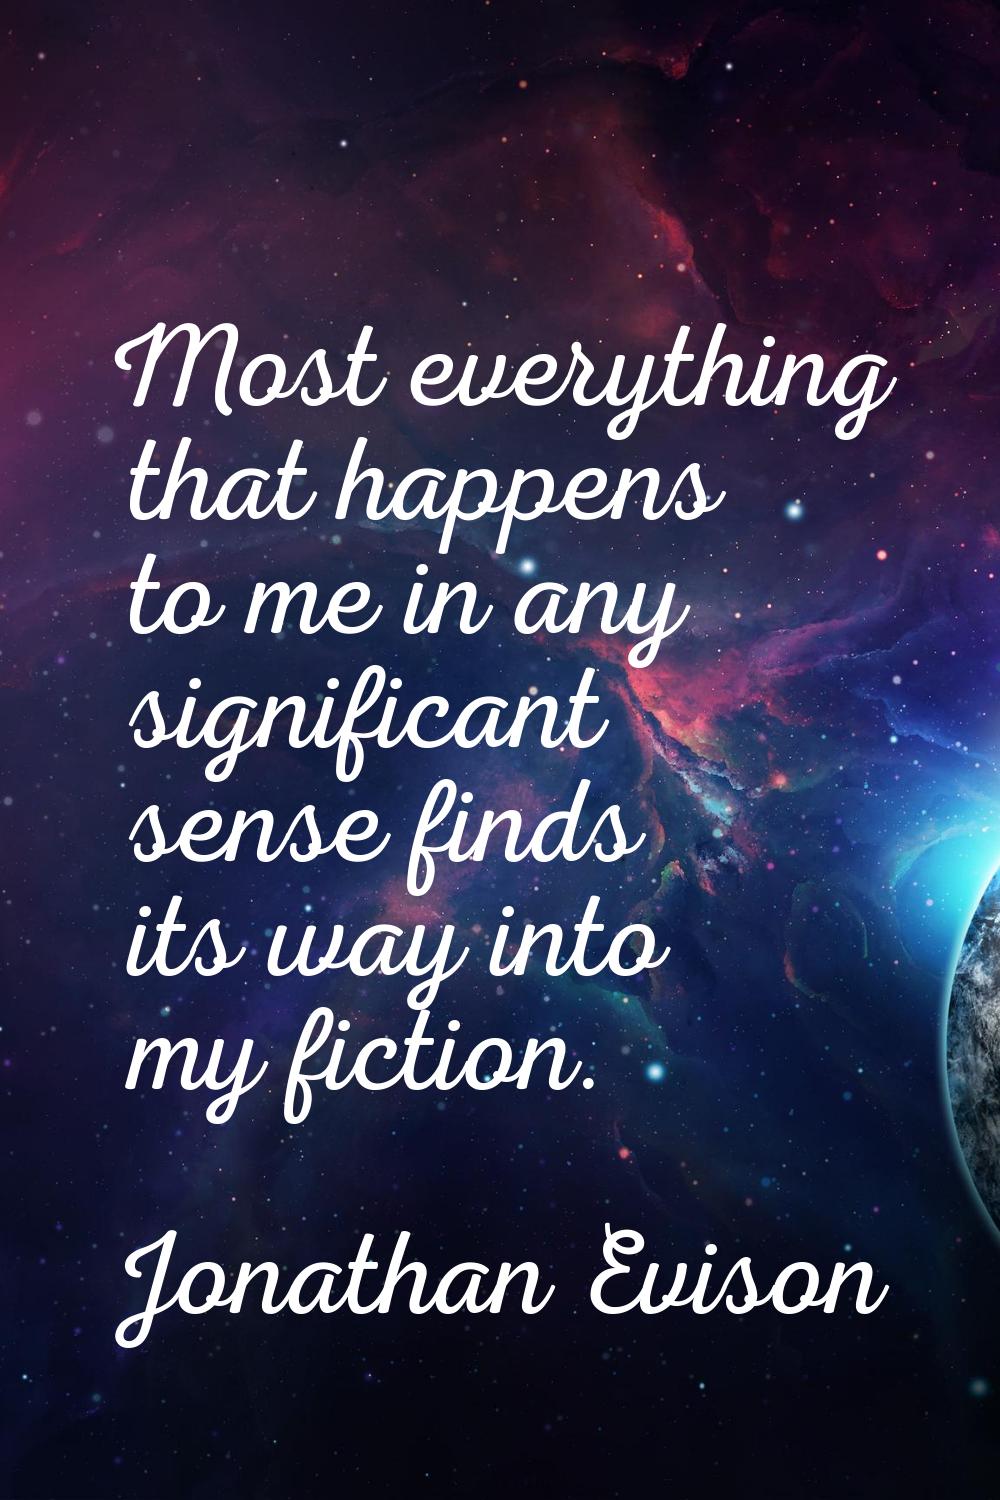 Most everything that happens to me in any significant sense finds its way into my fiction.